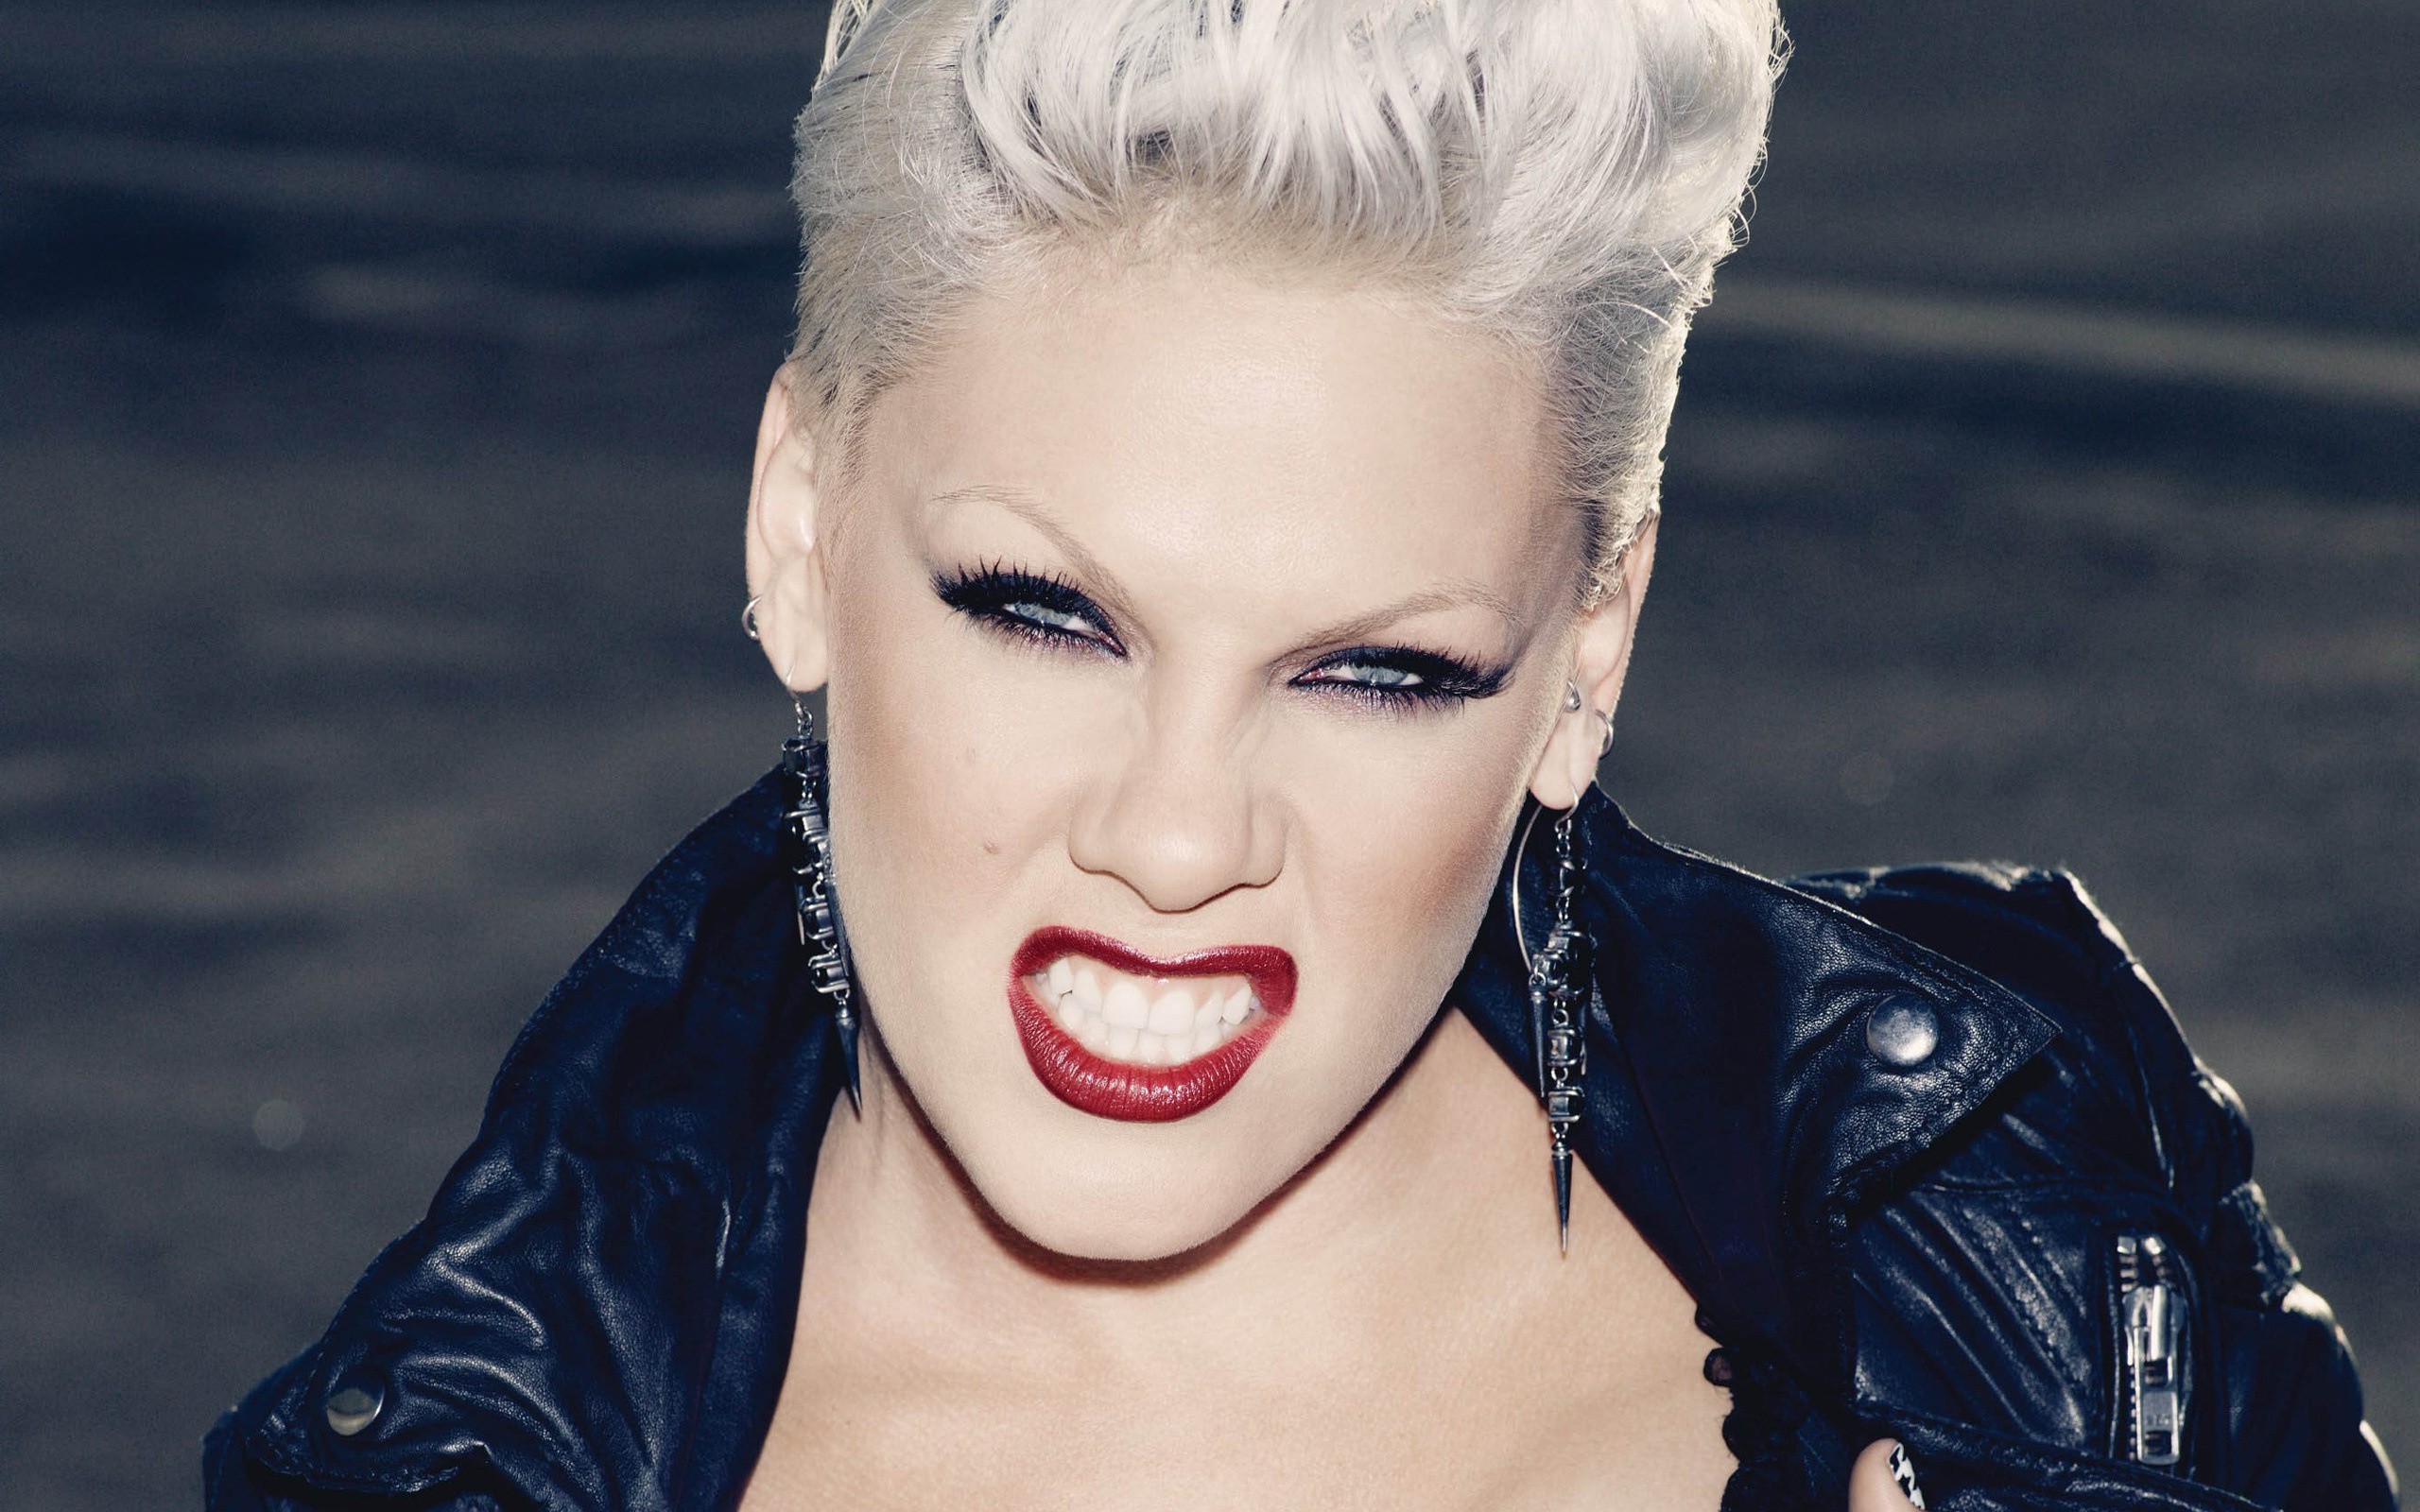 2560x1600 1000+ images about pink on Pinterest | Singer pink